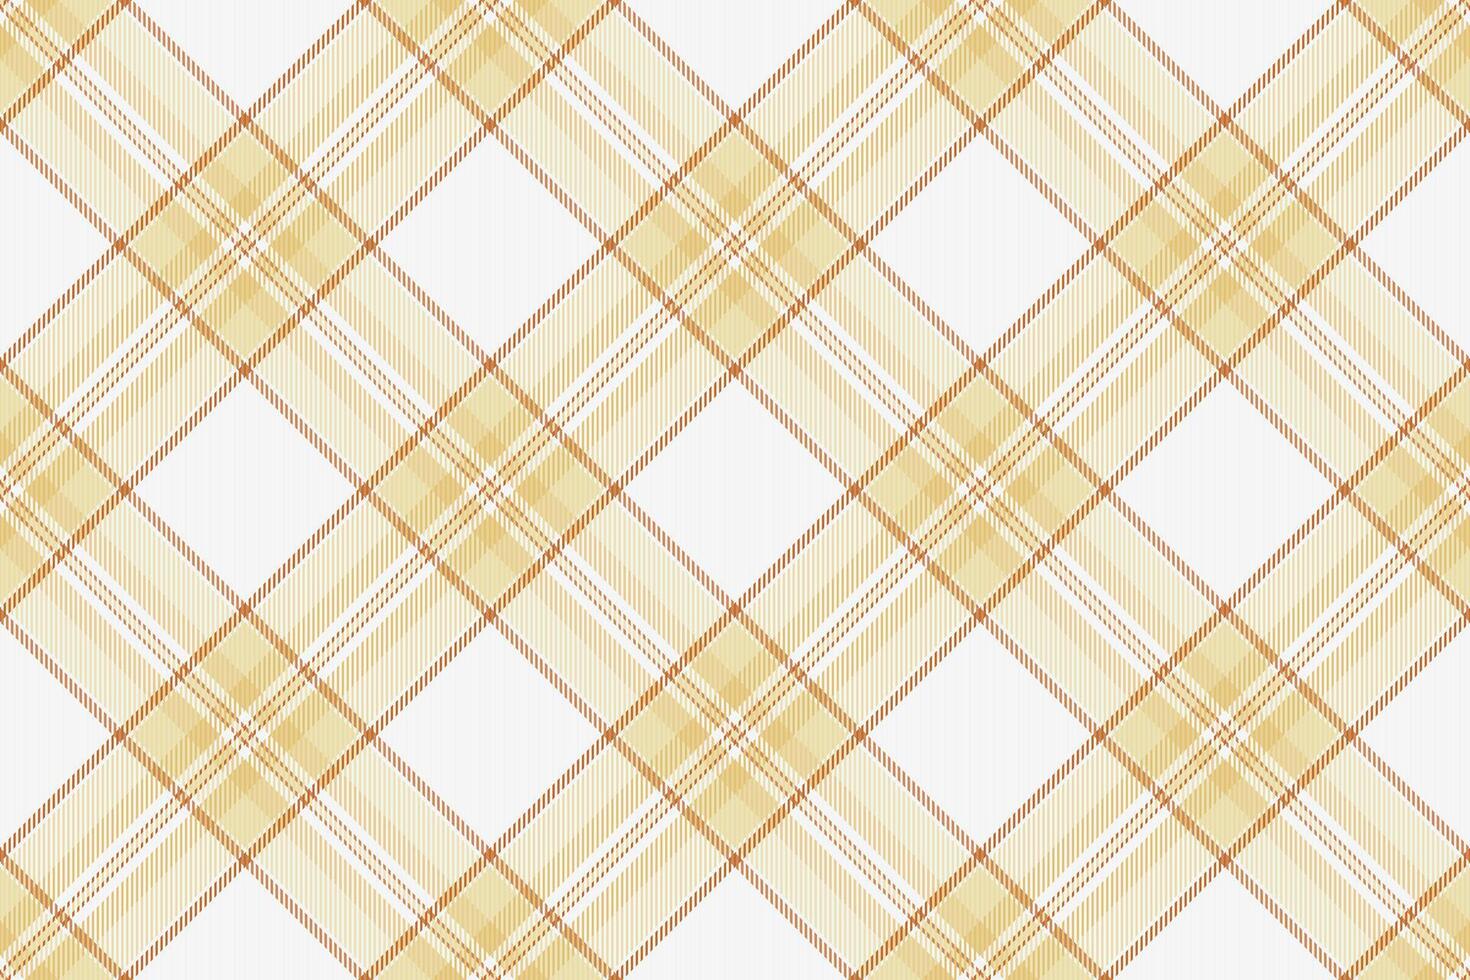 Romantic plaid check texture, industry seamless background tartan. Up textile vector fabric pattern in white and light colors.